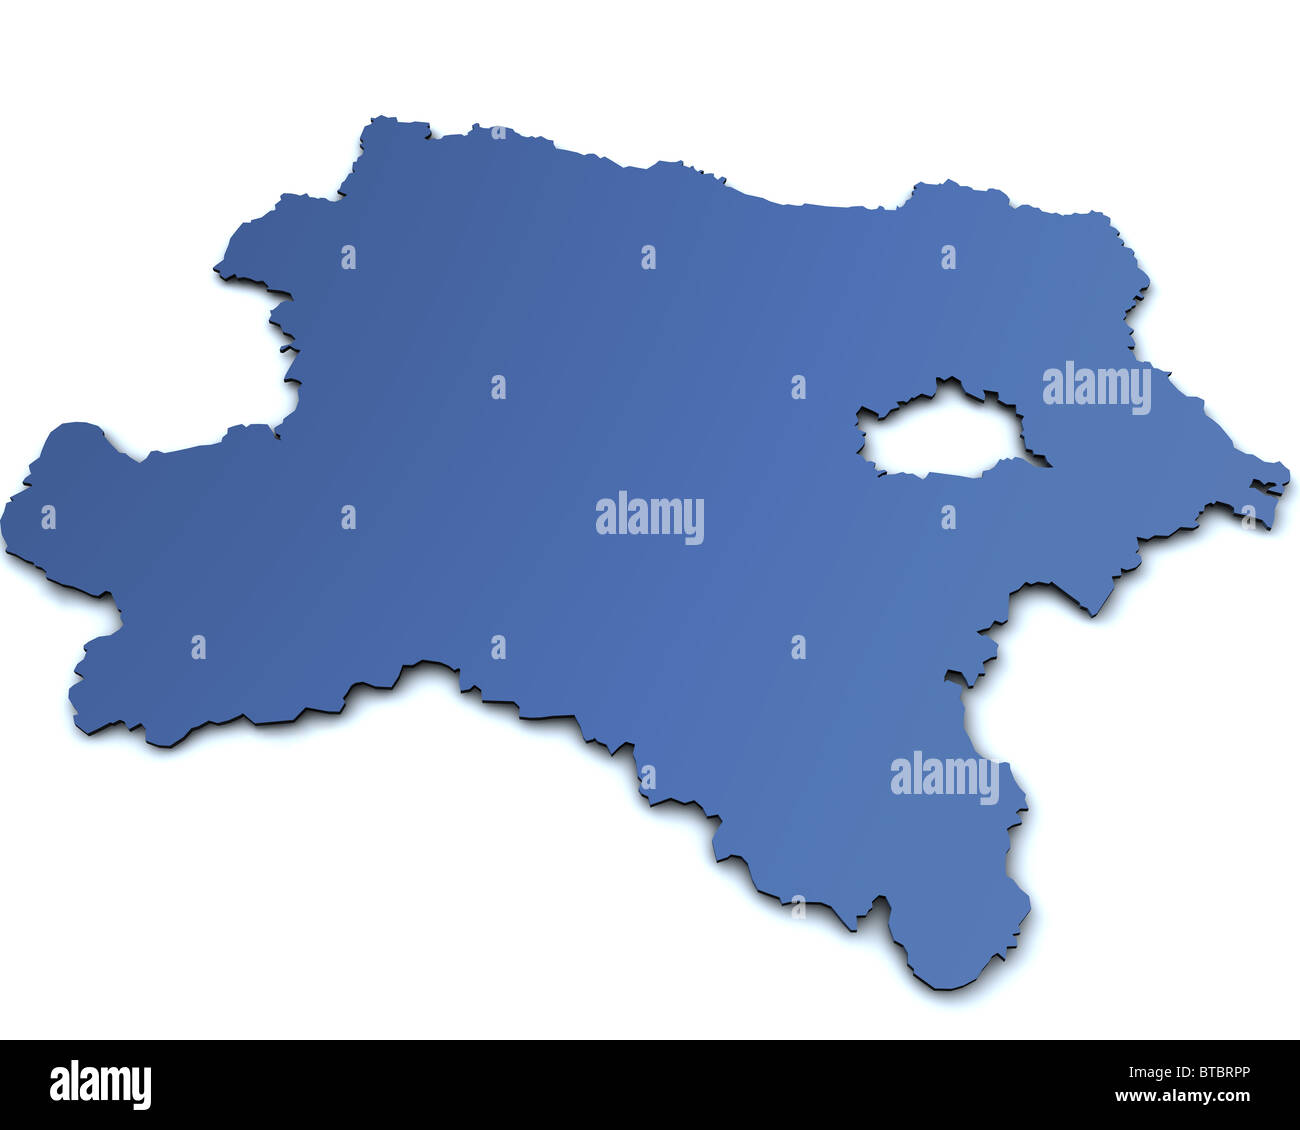 Rendered map of the austrian state of Lower Austria Stock Photo